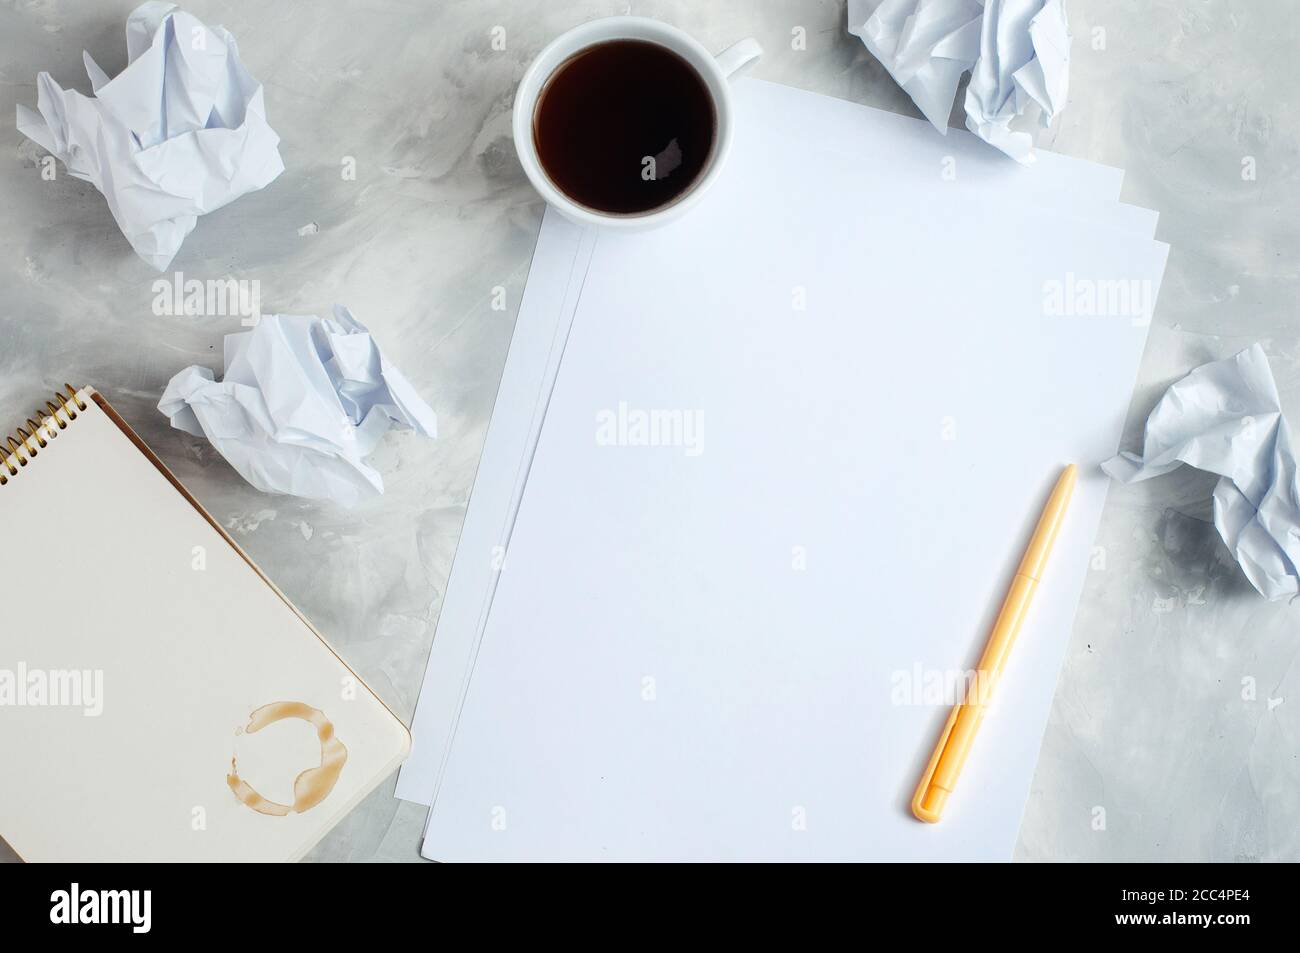 Brainstorm concept with crumpled paper, notebook and cup of coffee Stock Photo